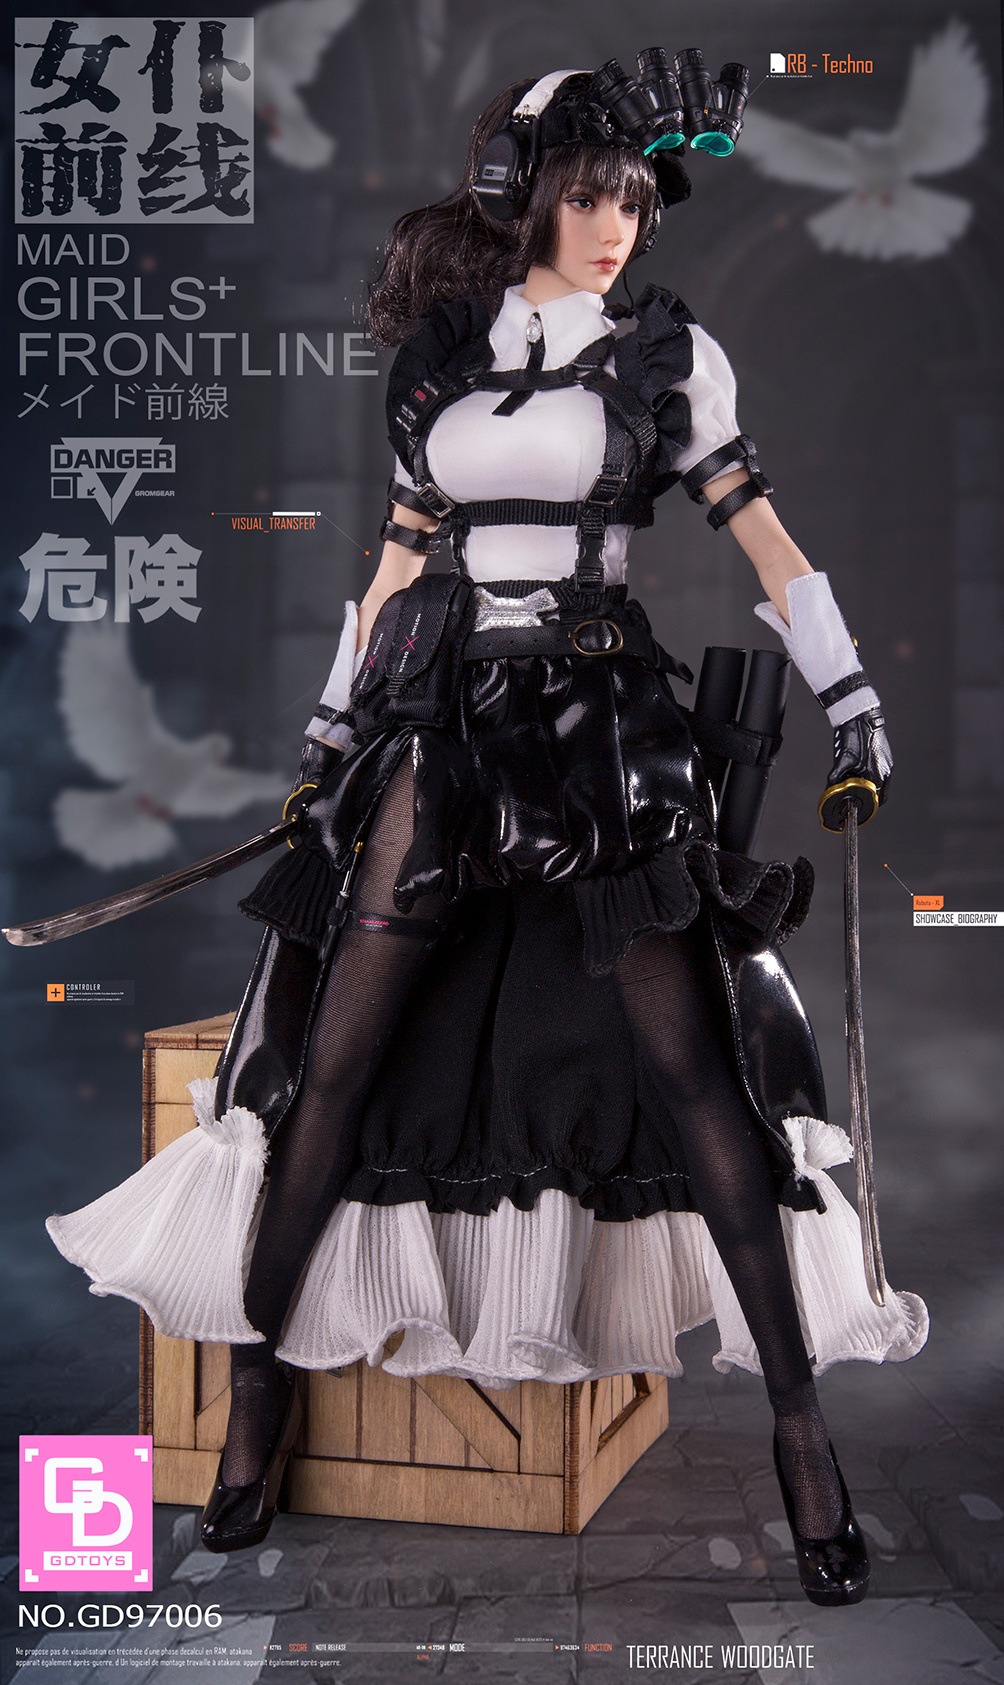 MaidGirls - NEW PRODUCT: GDTOYS: GD97006 1/6 Scale Maid Girls+ Frontline - YULIA 22563910